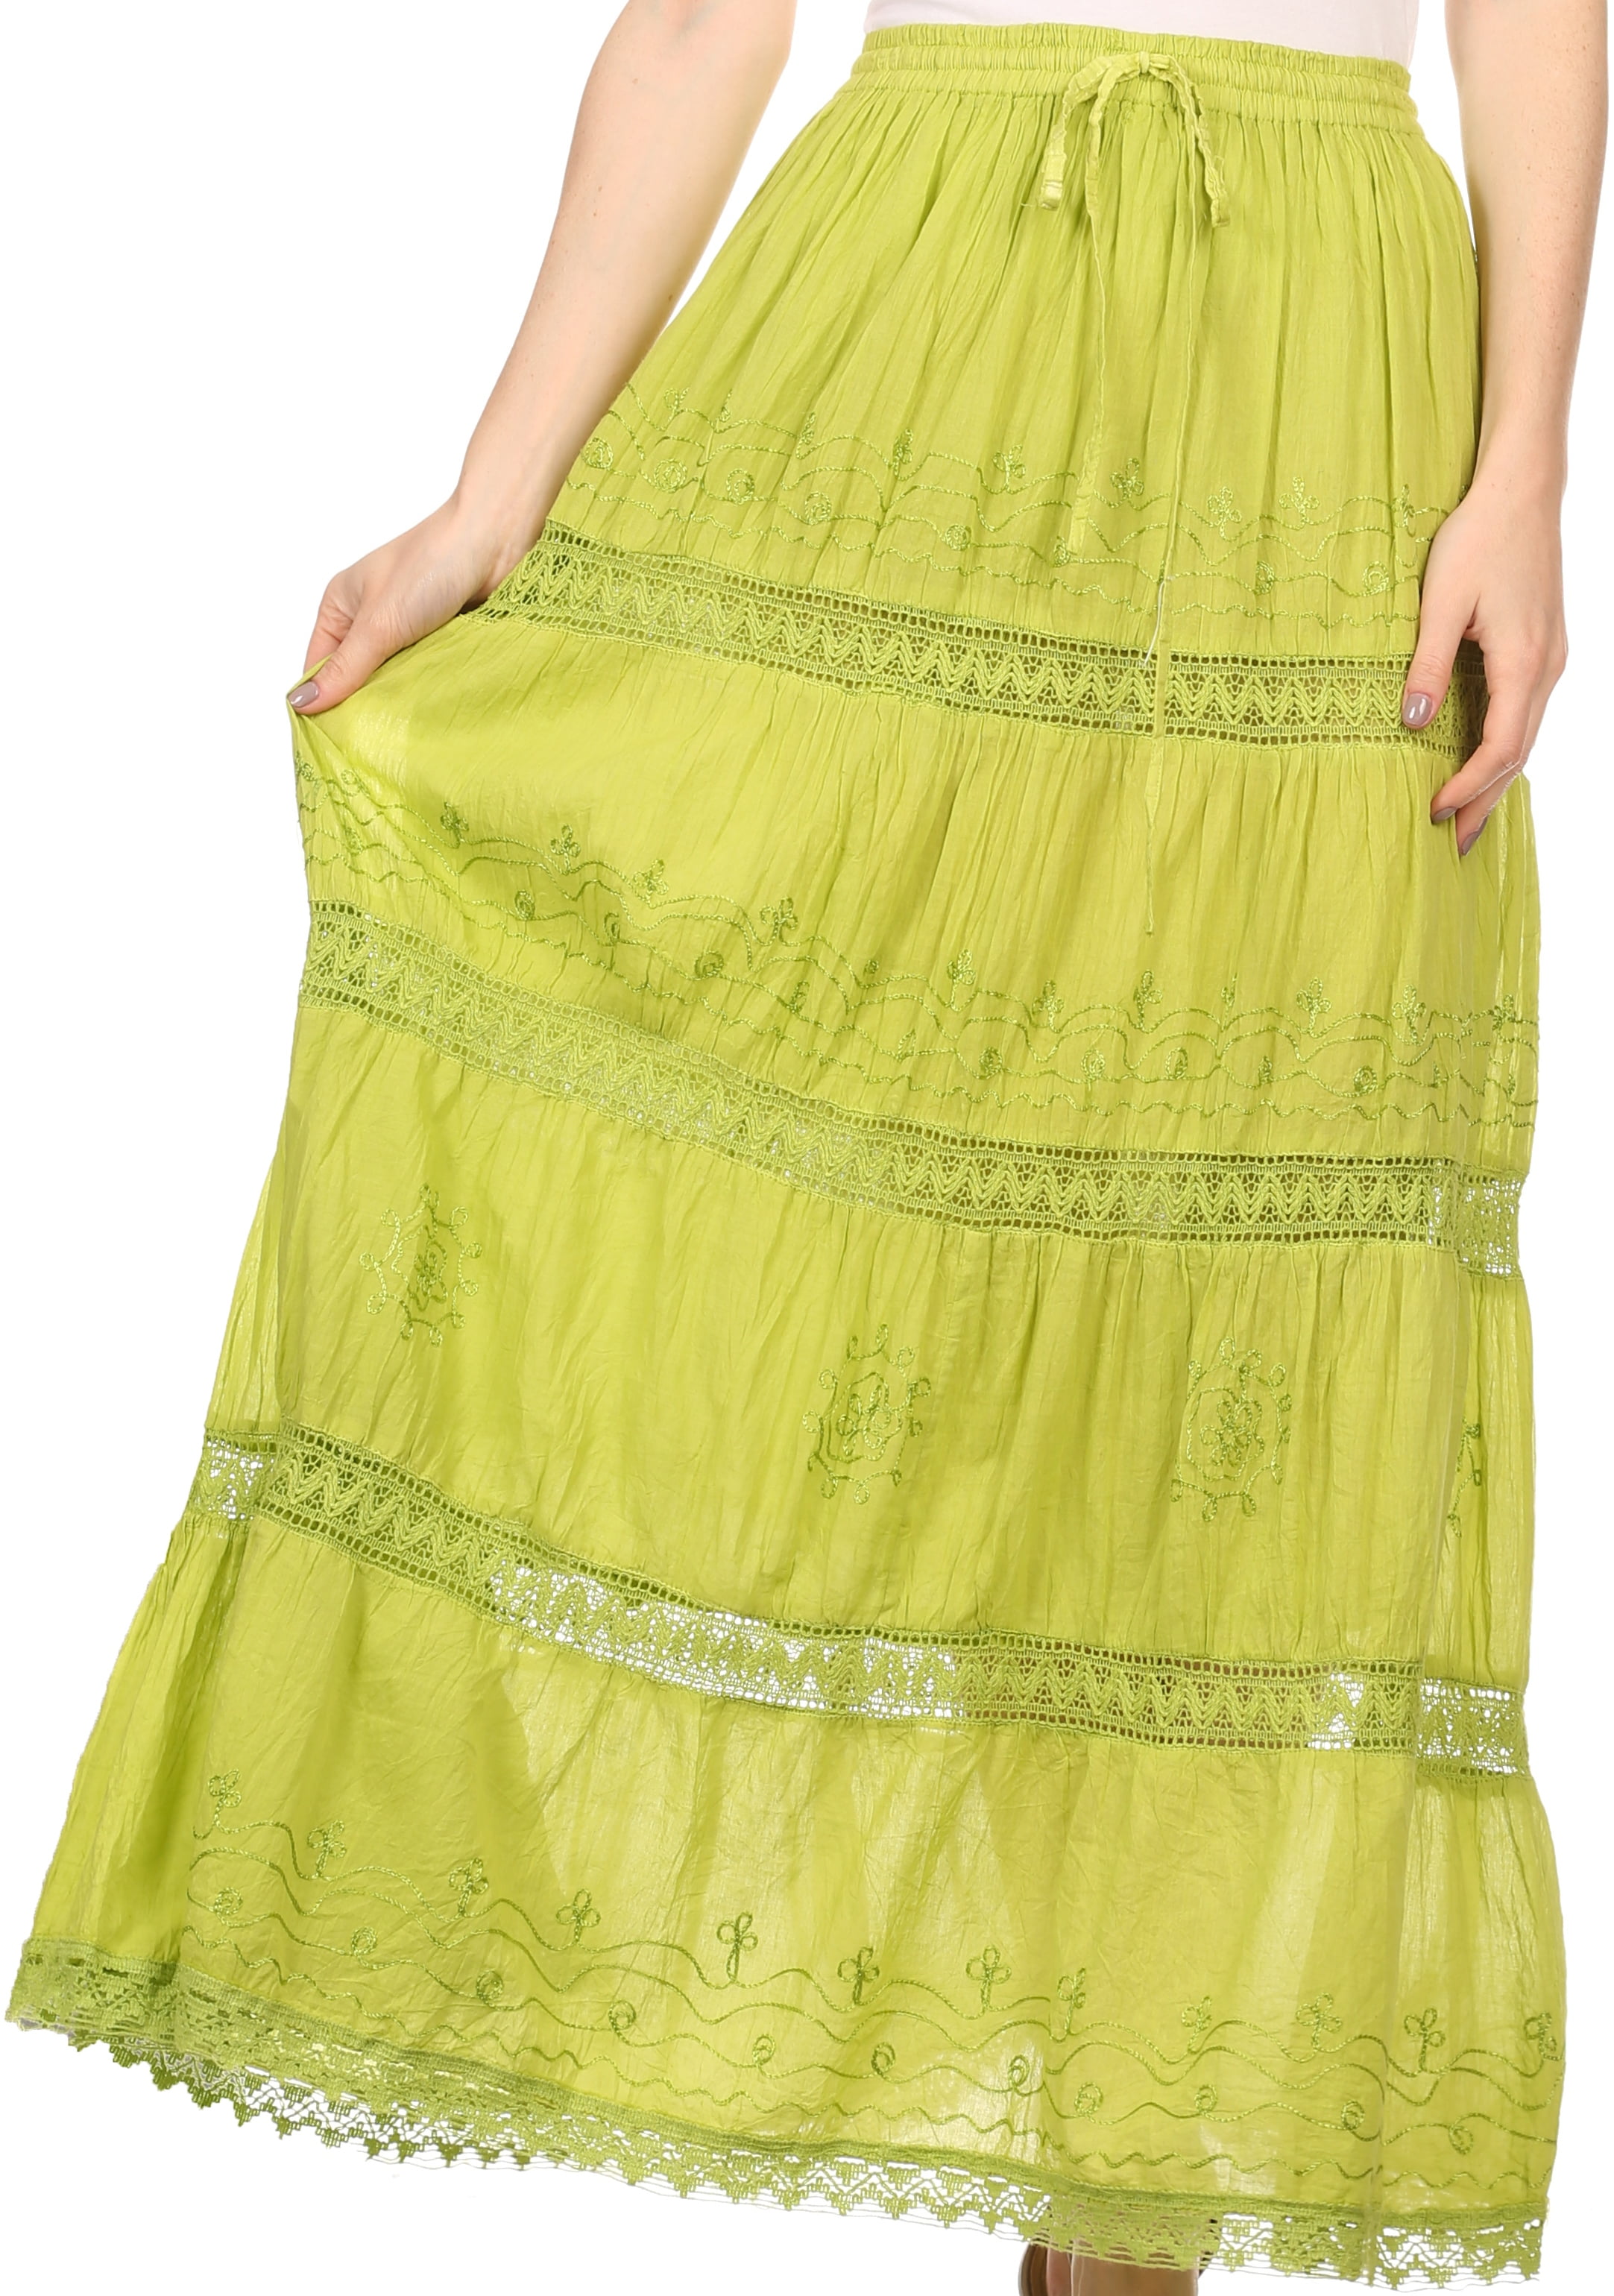 Sakkas Solid Embroidered Gypsy Bohemian Mid Length Cotton Skirt - Lime -  One Size - Walmart.com